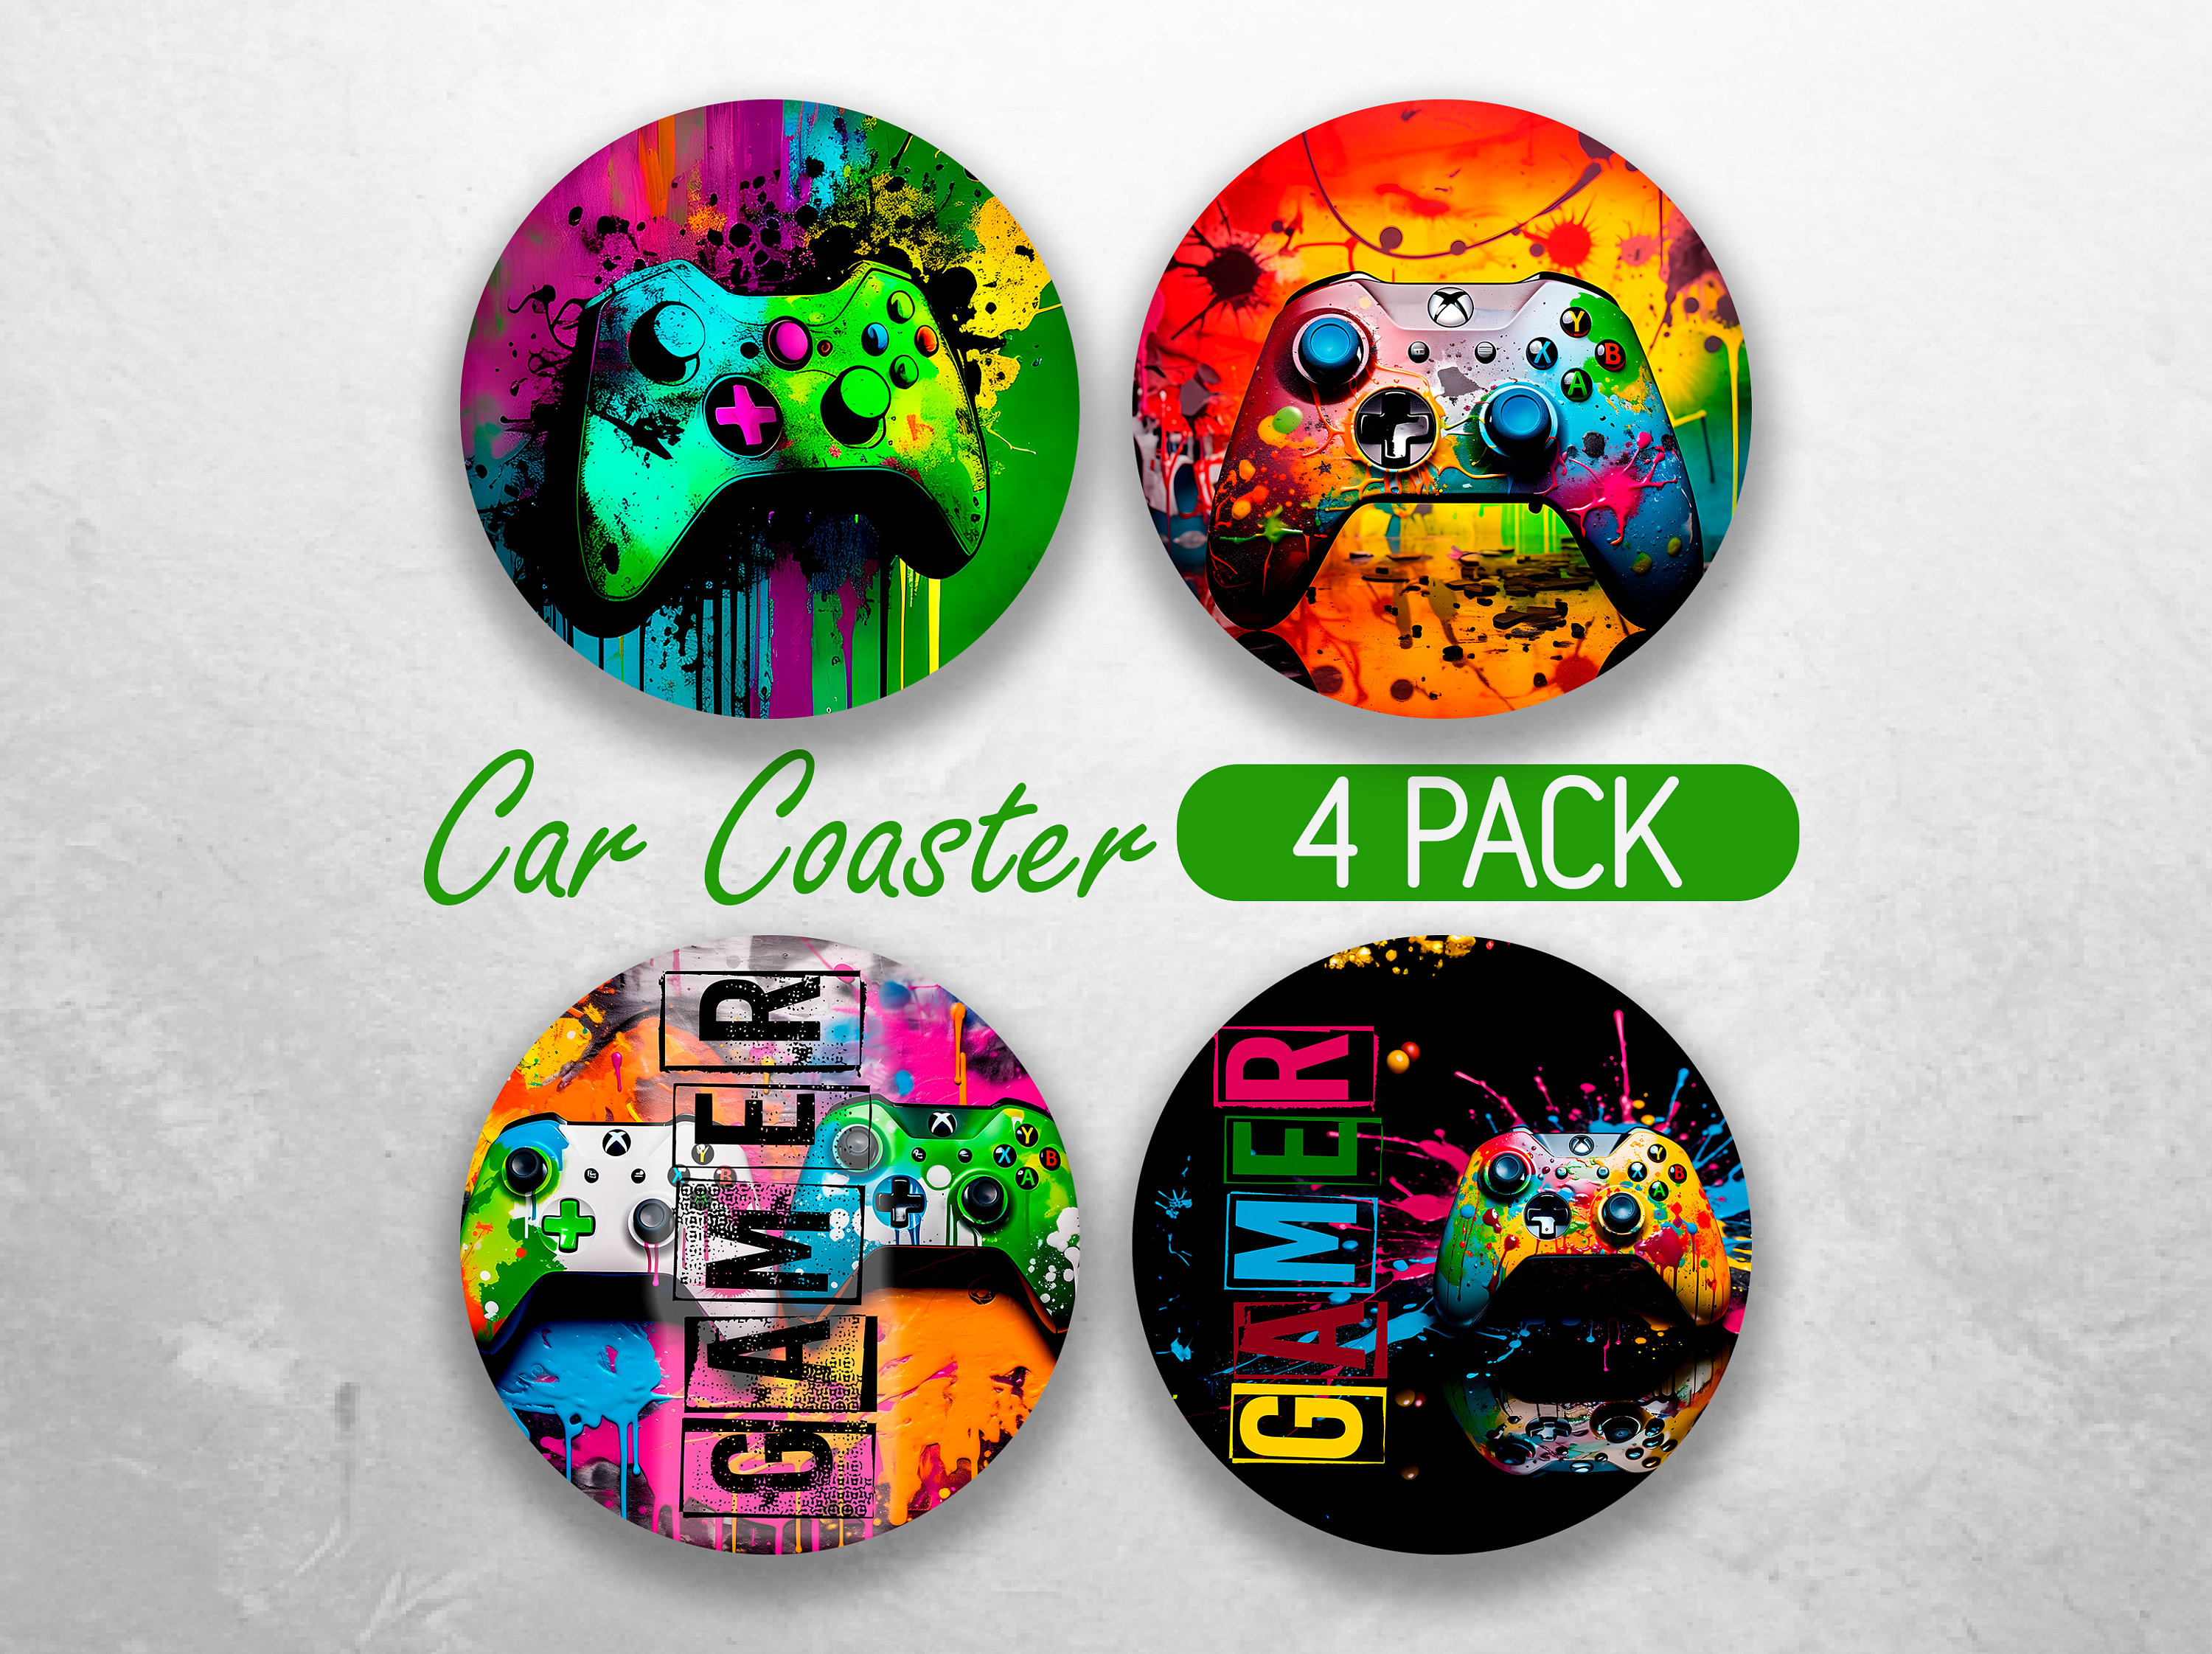 Gaming Coasters by Dreamcontroller USB Rechargeable LED Coaster for Gamer Room Decor. Light Up Coasters for Gaming Desk Decor, Nerd Decorations, Nerdy